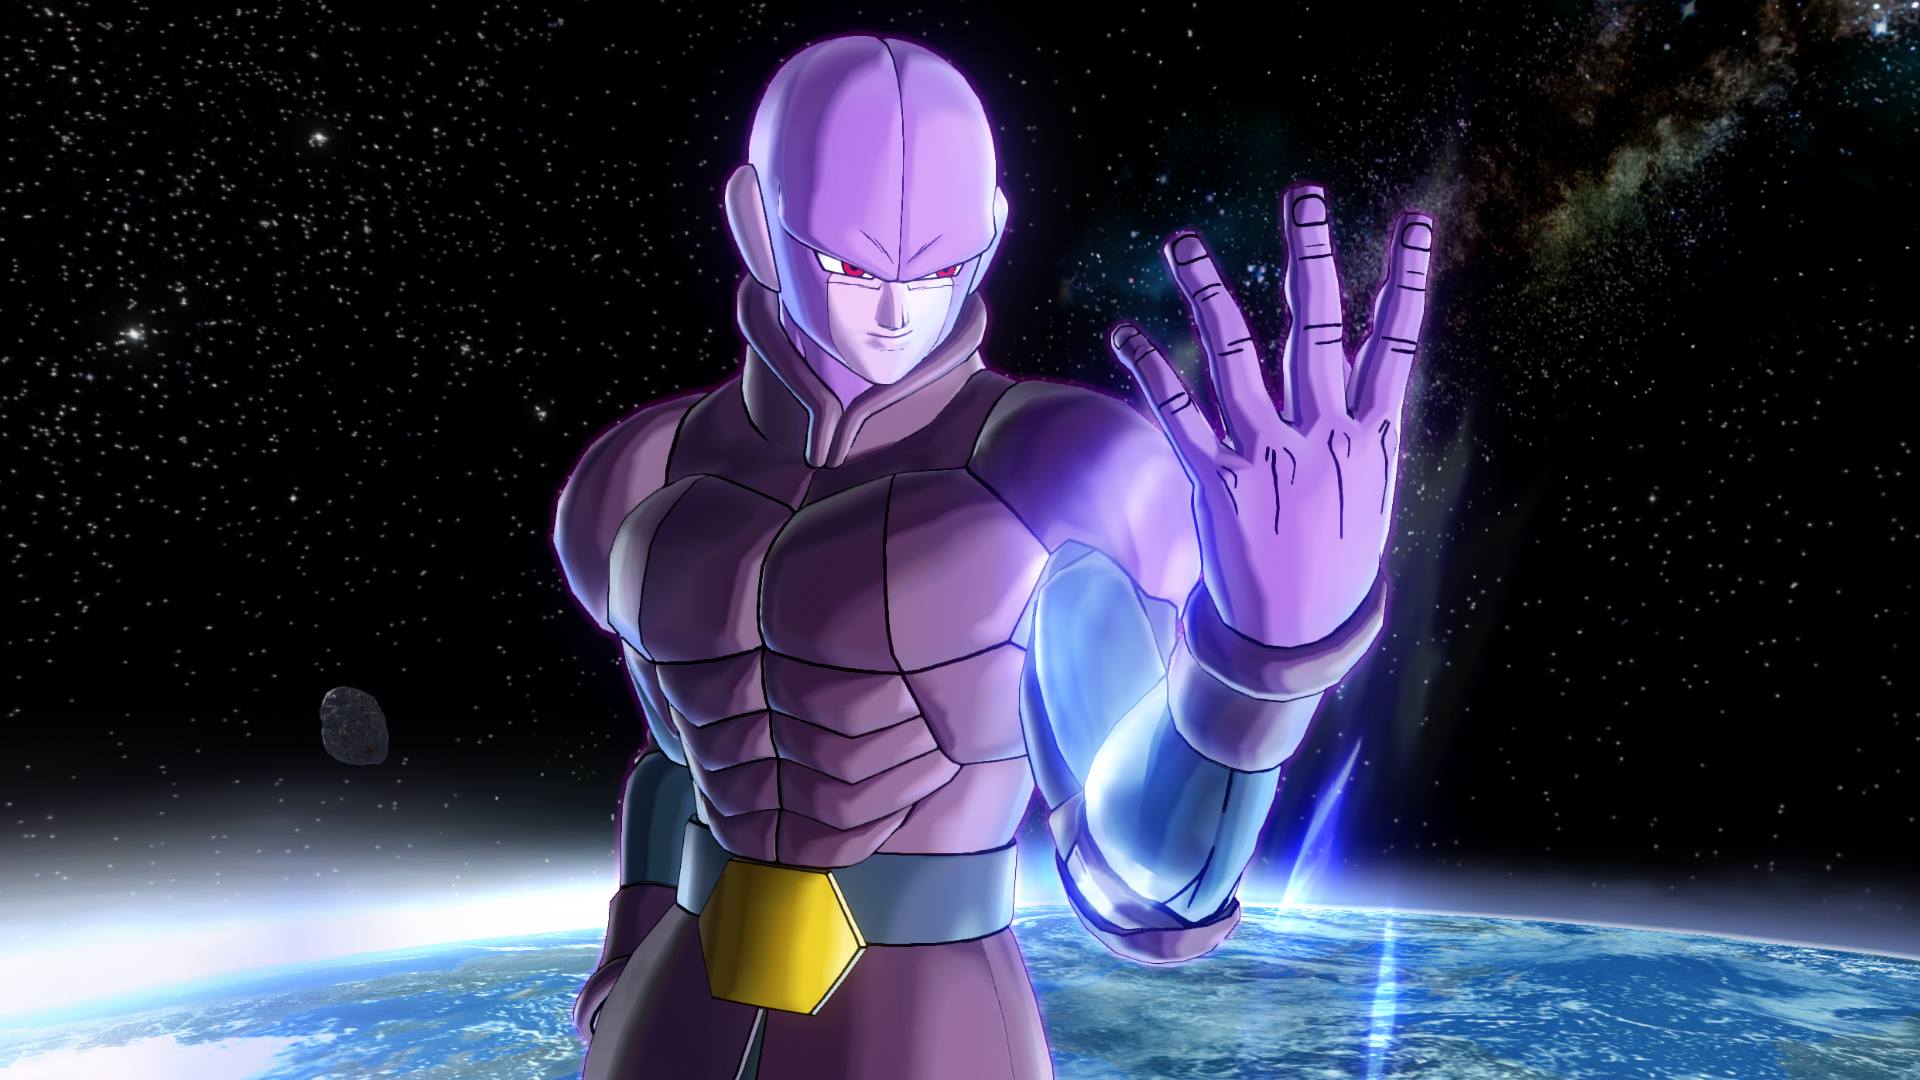 dragon-ball-xenoverse-2-full-roster-revealed-and-new-trailers-capsule